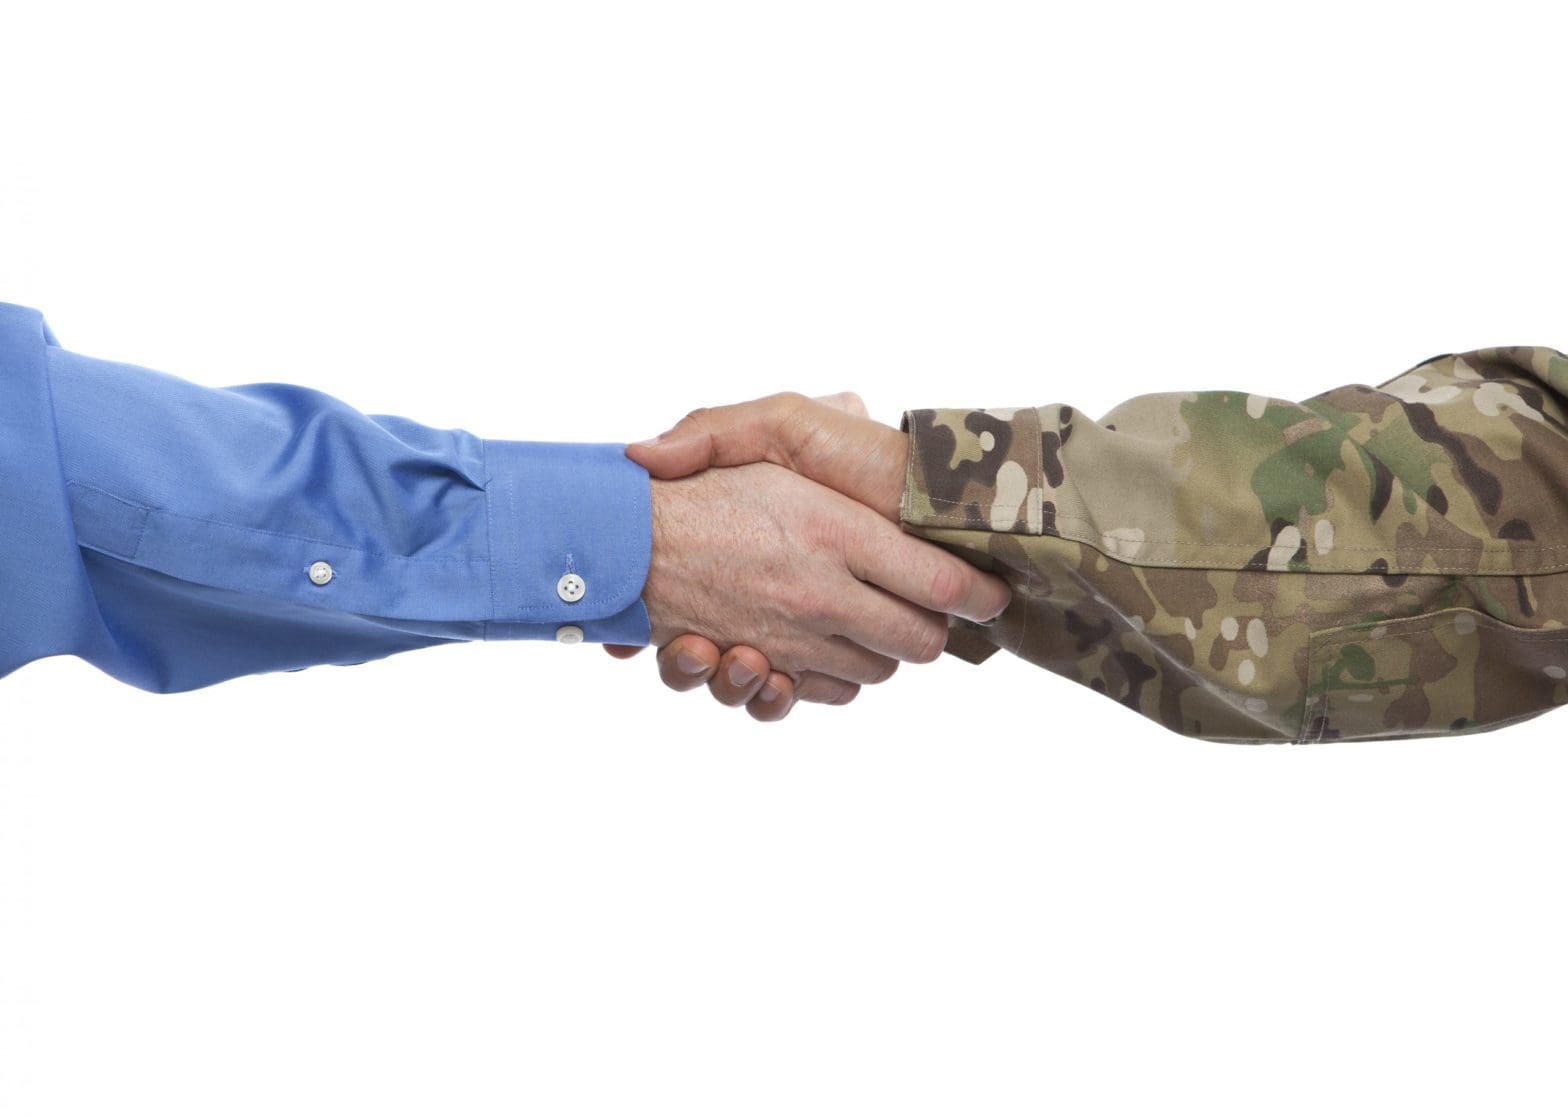 Why You Should Hire Veterans